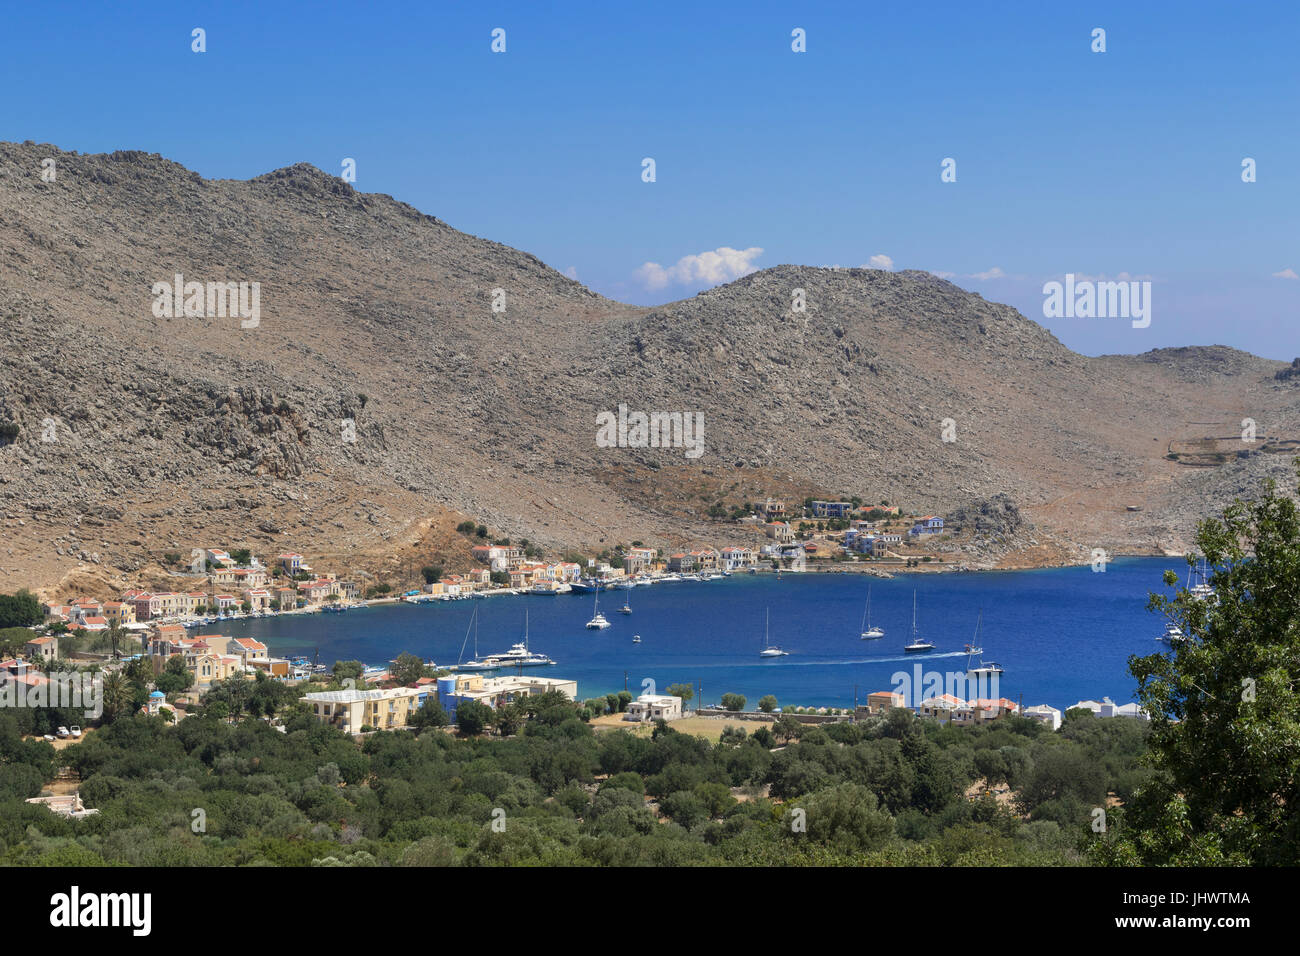 Symi Island, South Aegean, Greece - the view to Pedi Bay from Drakos, the remains of an ancient fortification in the hills Stock Photo